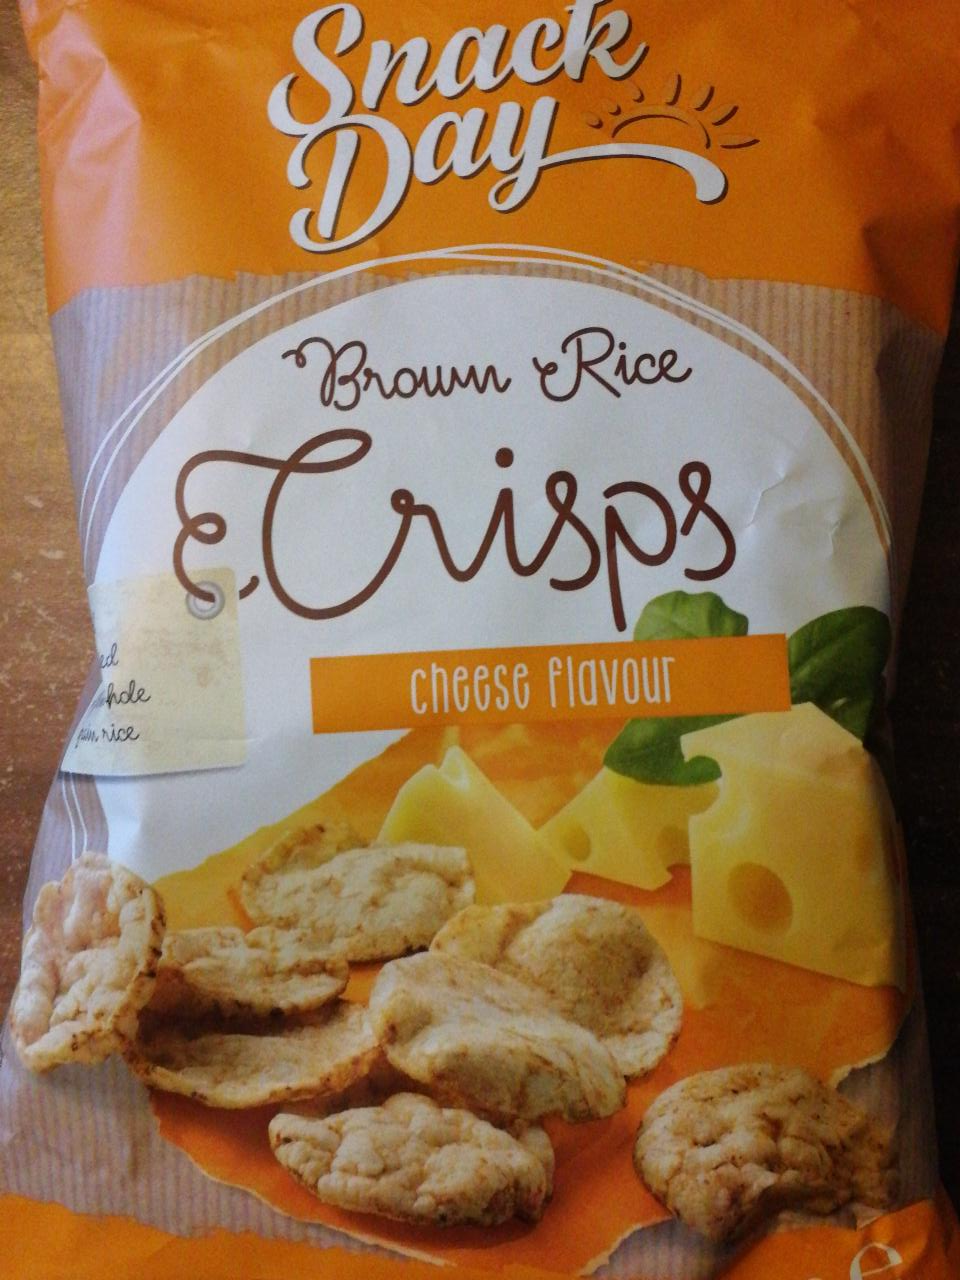 Fotografie - Brown Rice Crisps cheese flavour Snack Day